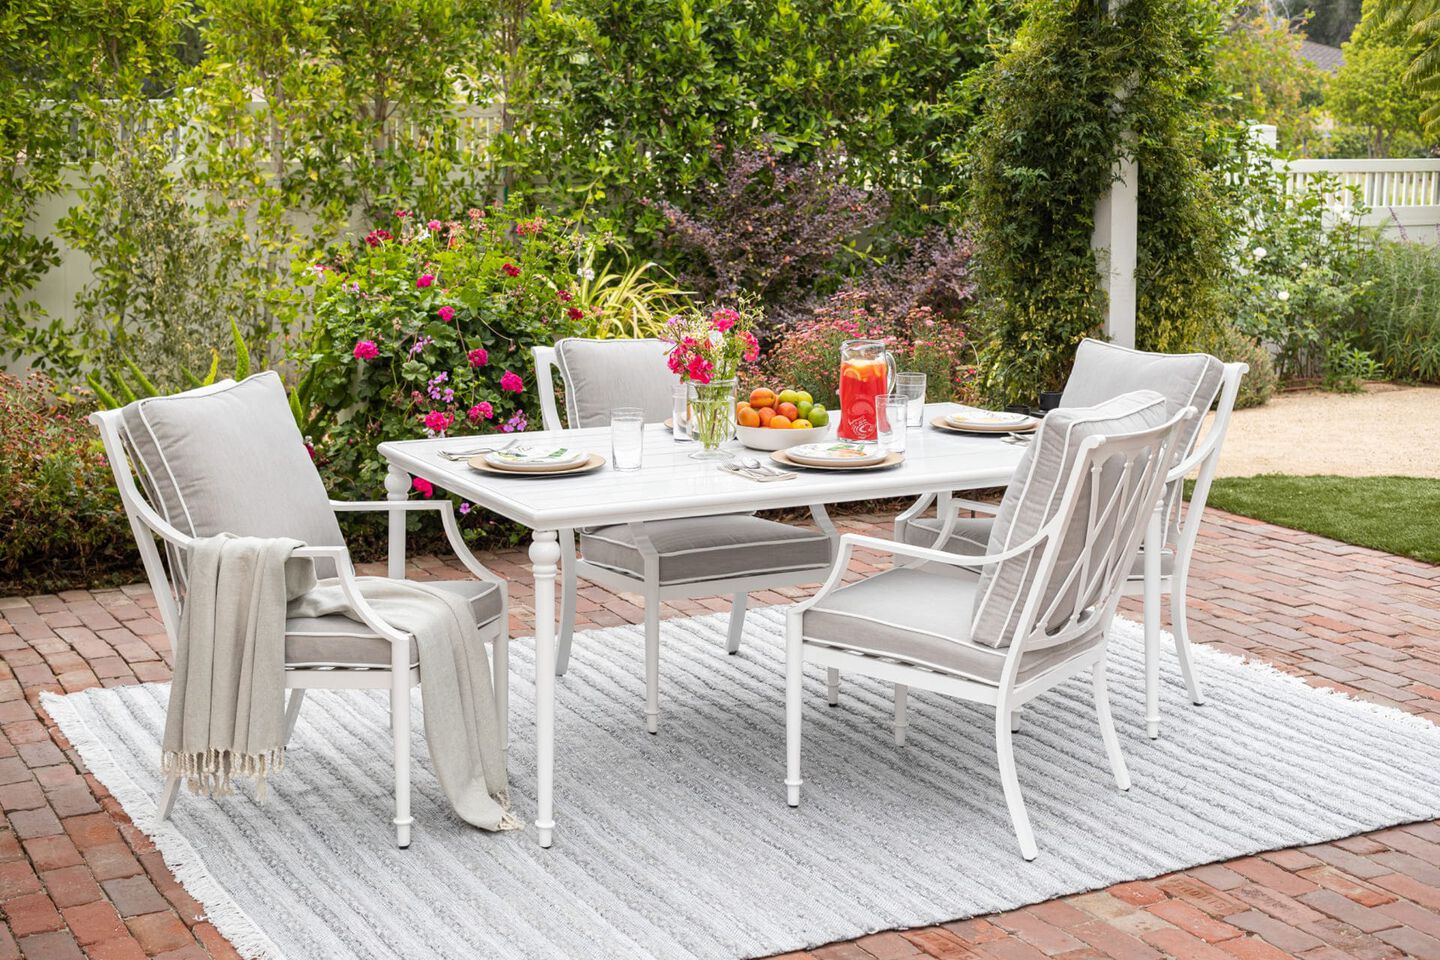 Gathercraft Hanover Outdoor Dining Table in Transitional Style Patio